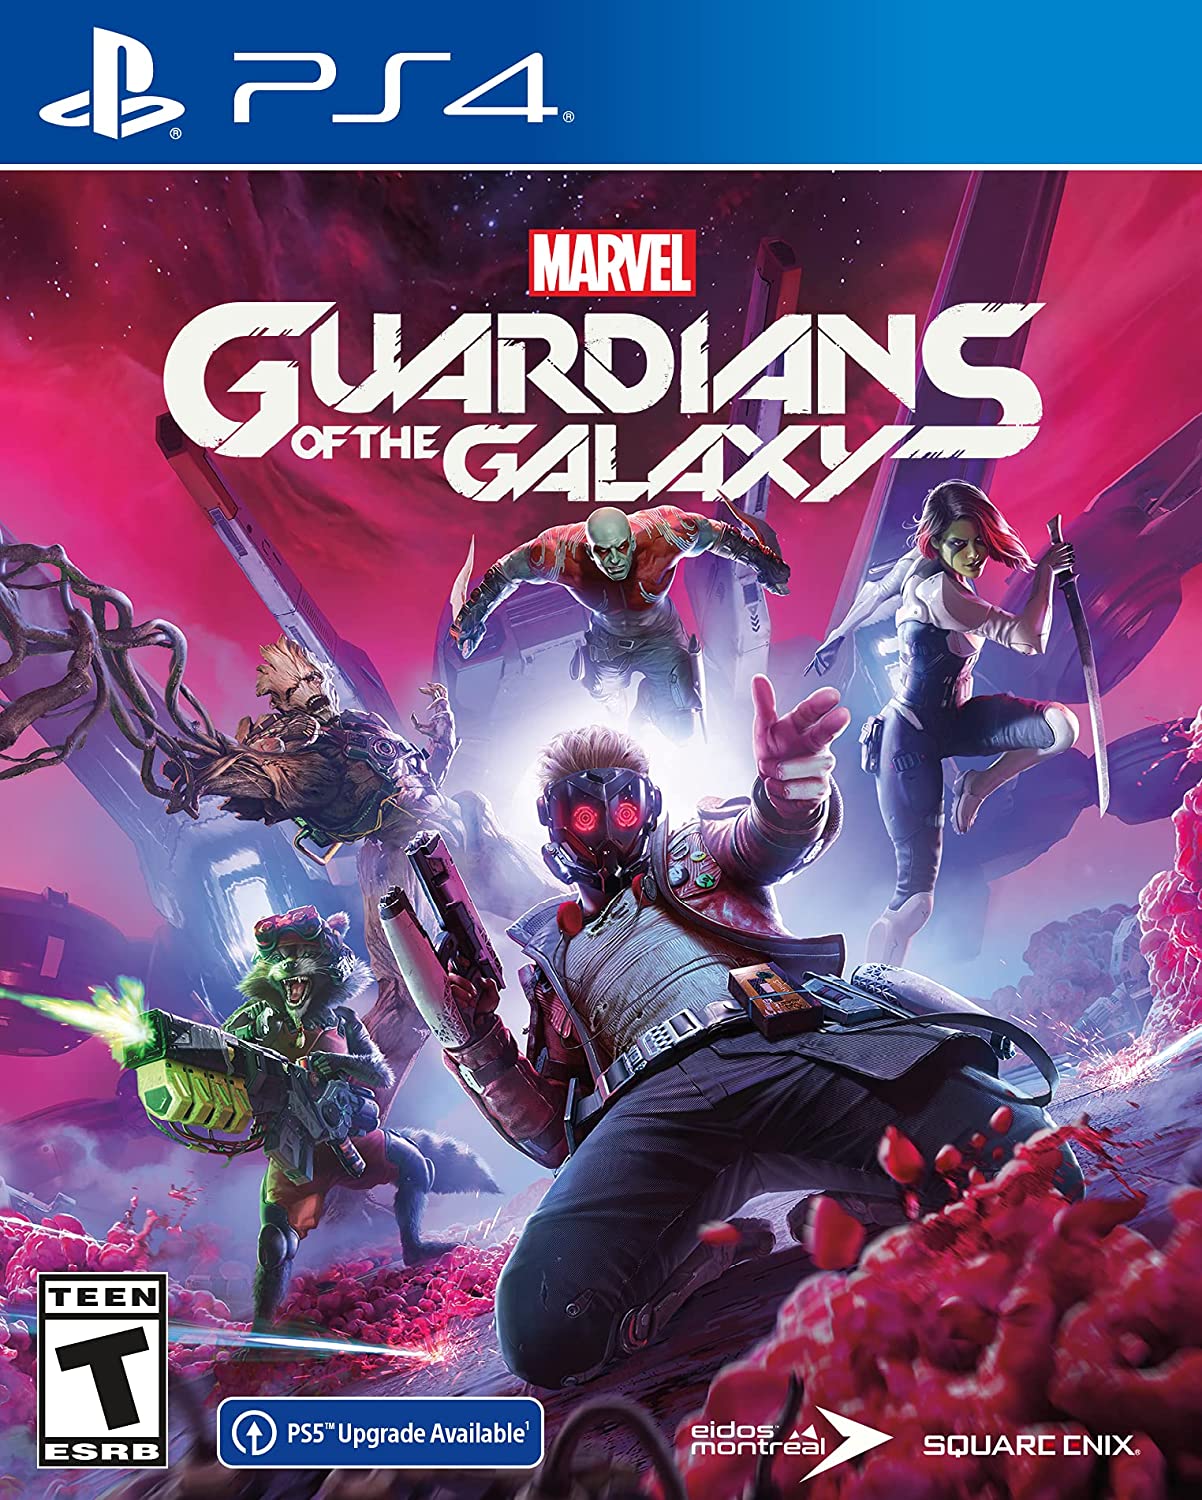 Marvel's Guardians Of The Galaxy for Playstation 4 - $22.99 (PS5/XBSX $29.99) @ Gamestop, Walmart and Amazon